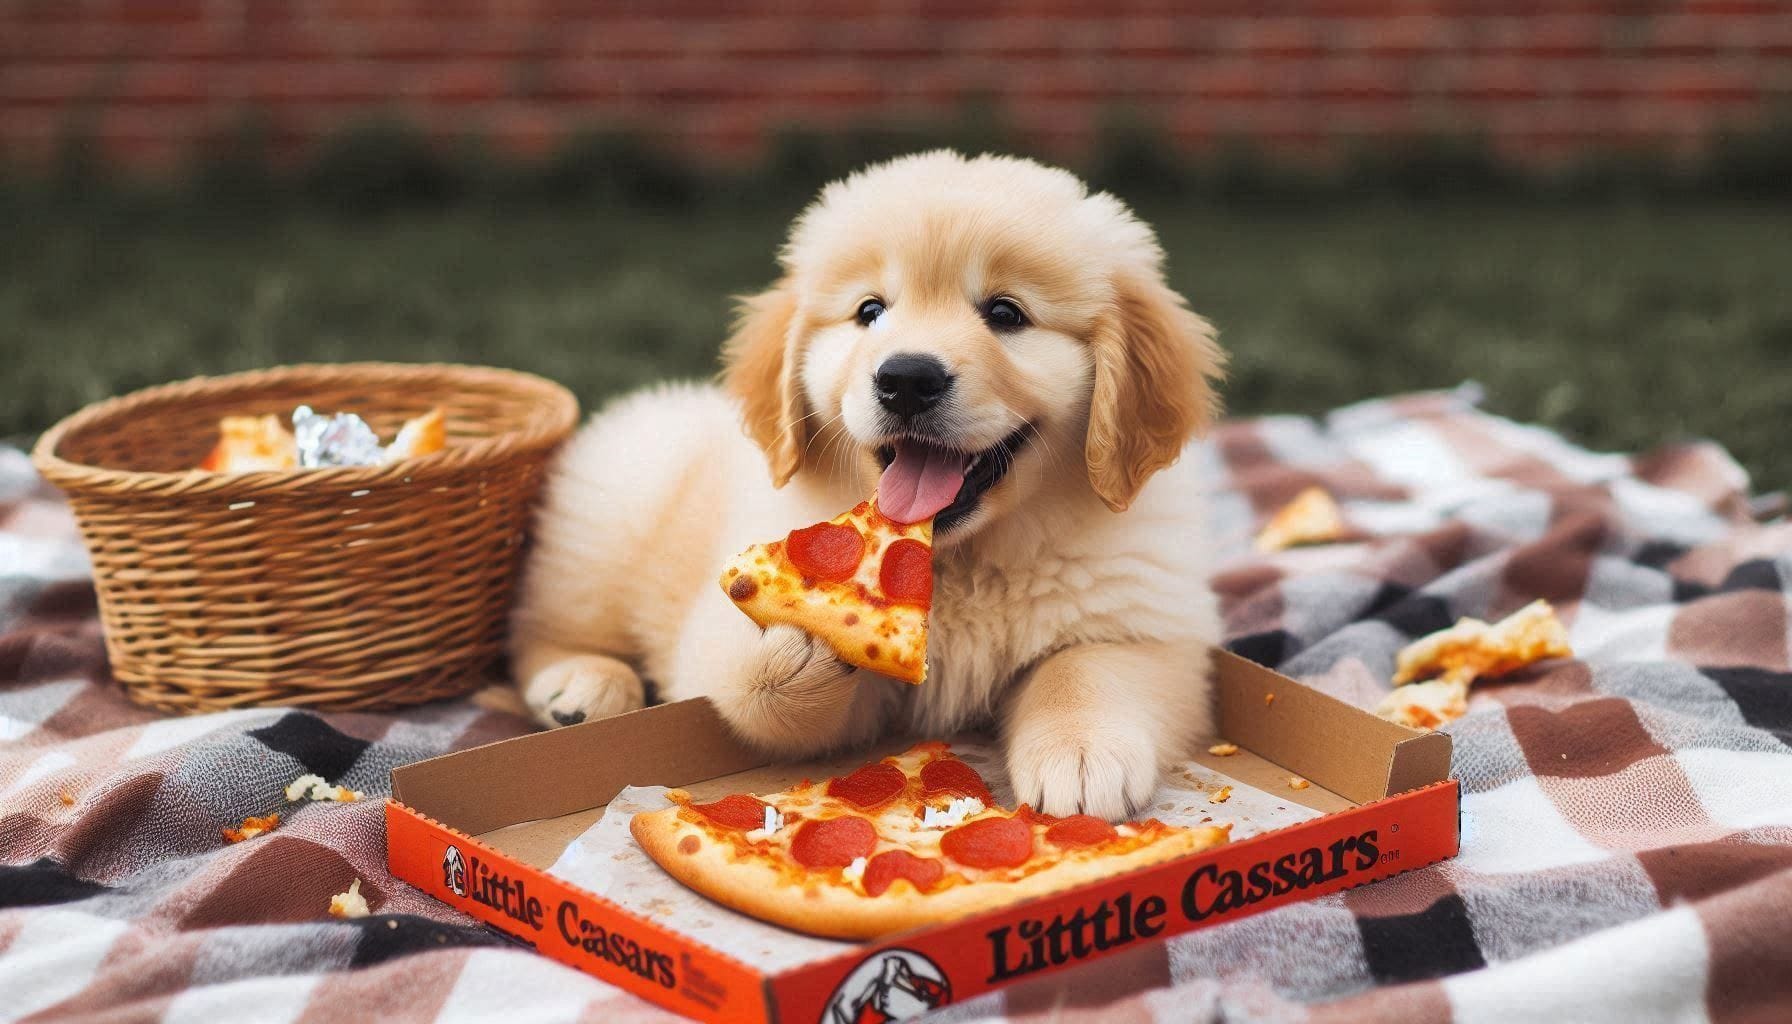 Can Dogs Eat Little Caesars Pizza